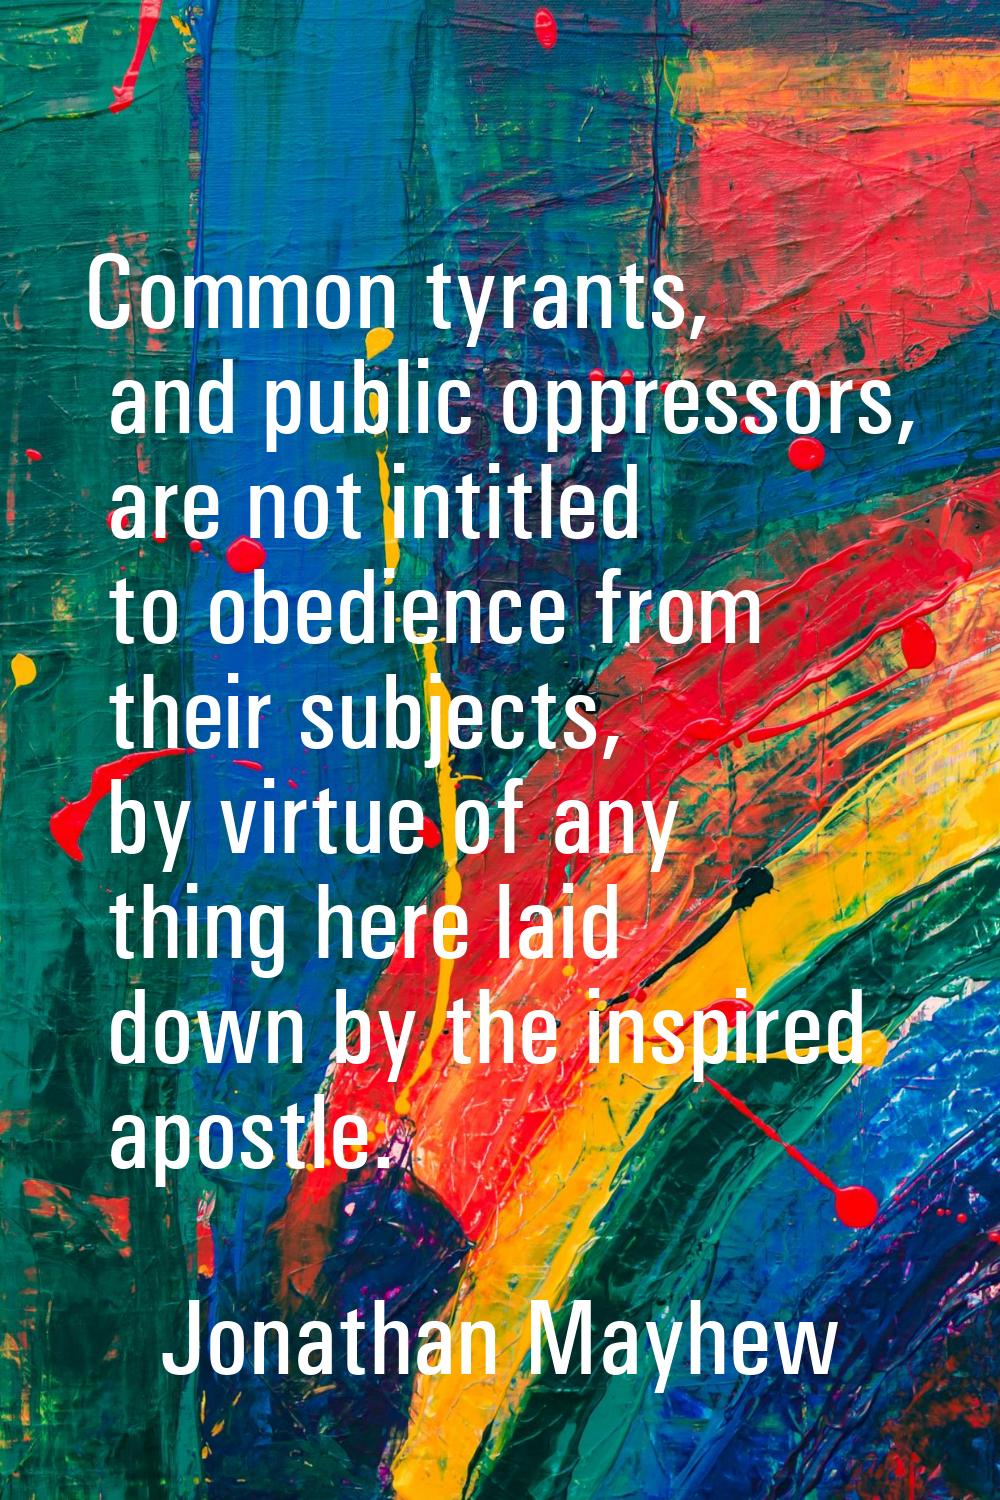 Common tyrants, and public oppressors, are not intitled to obedience from their subjects, by virtue